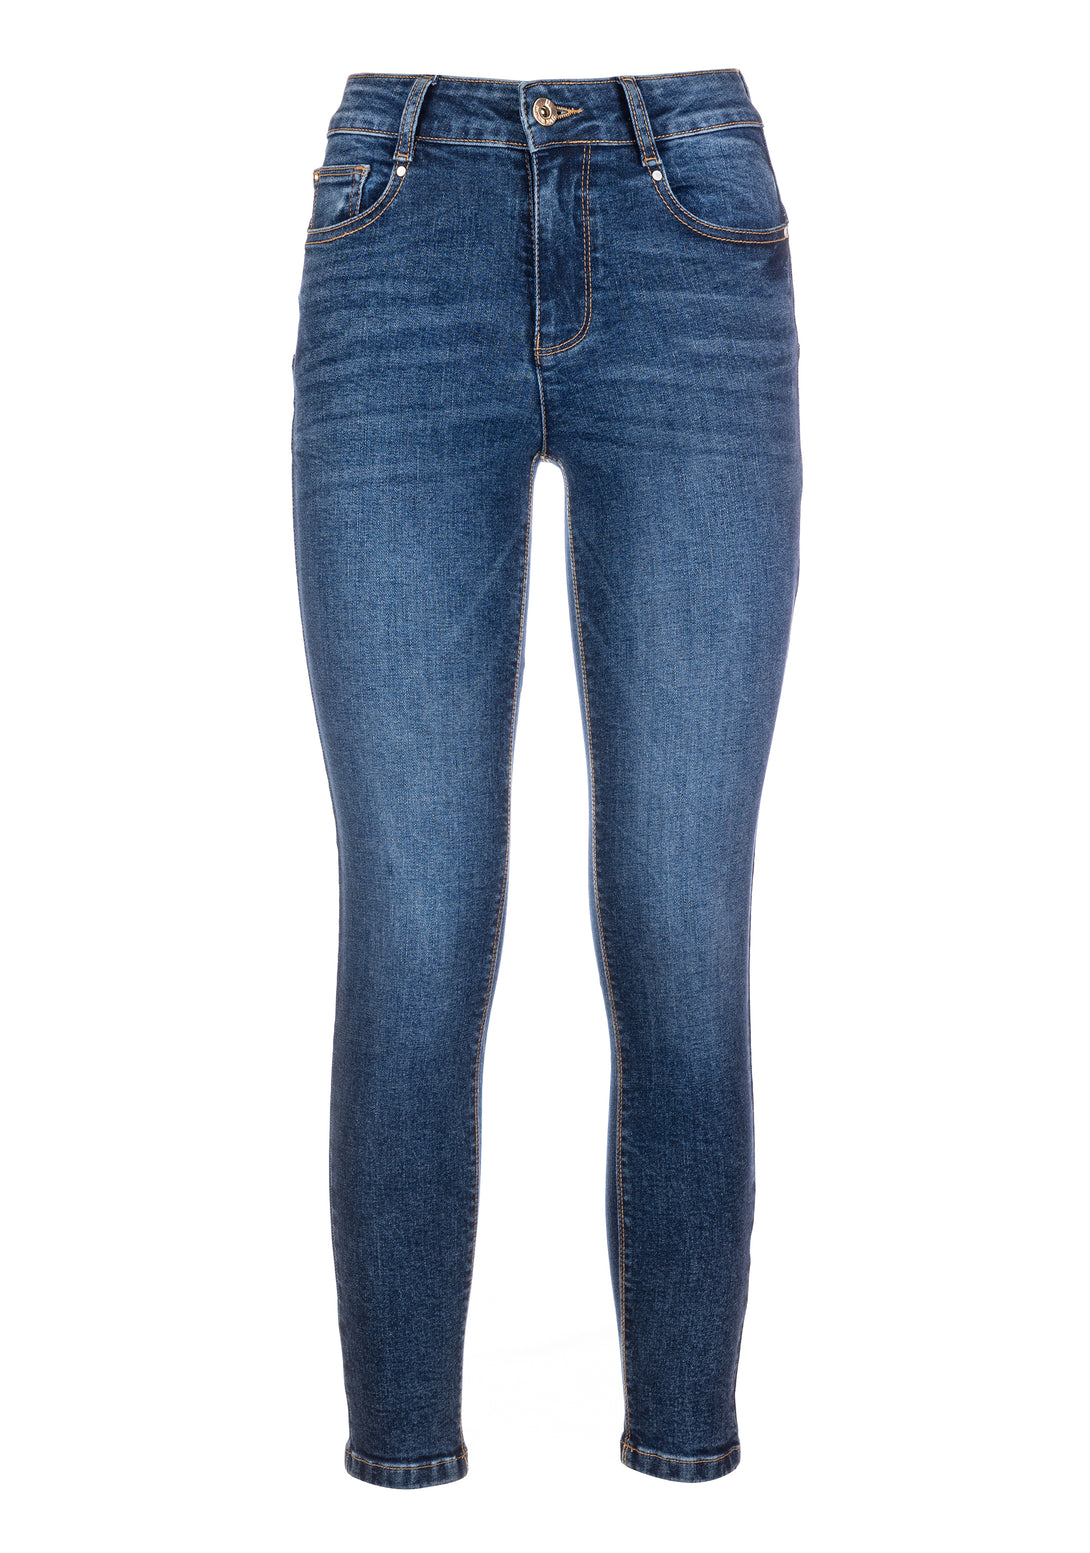 Jeans skinny fit with push up effect made in denim with middle wash Fracomina FP23WV8000D40102-B06-1